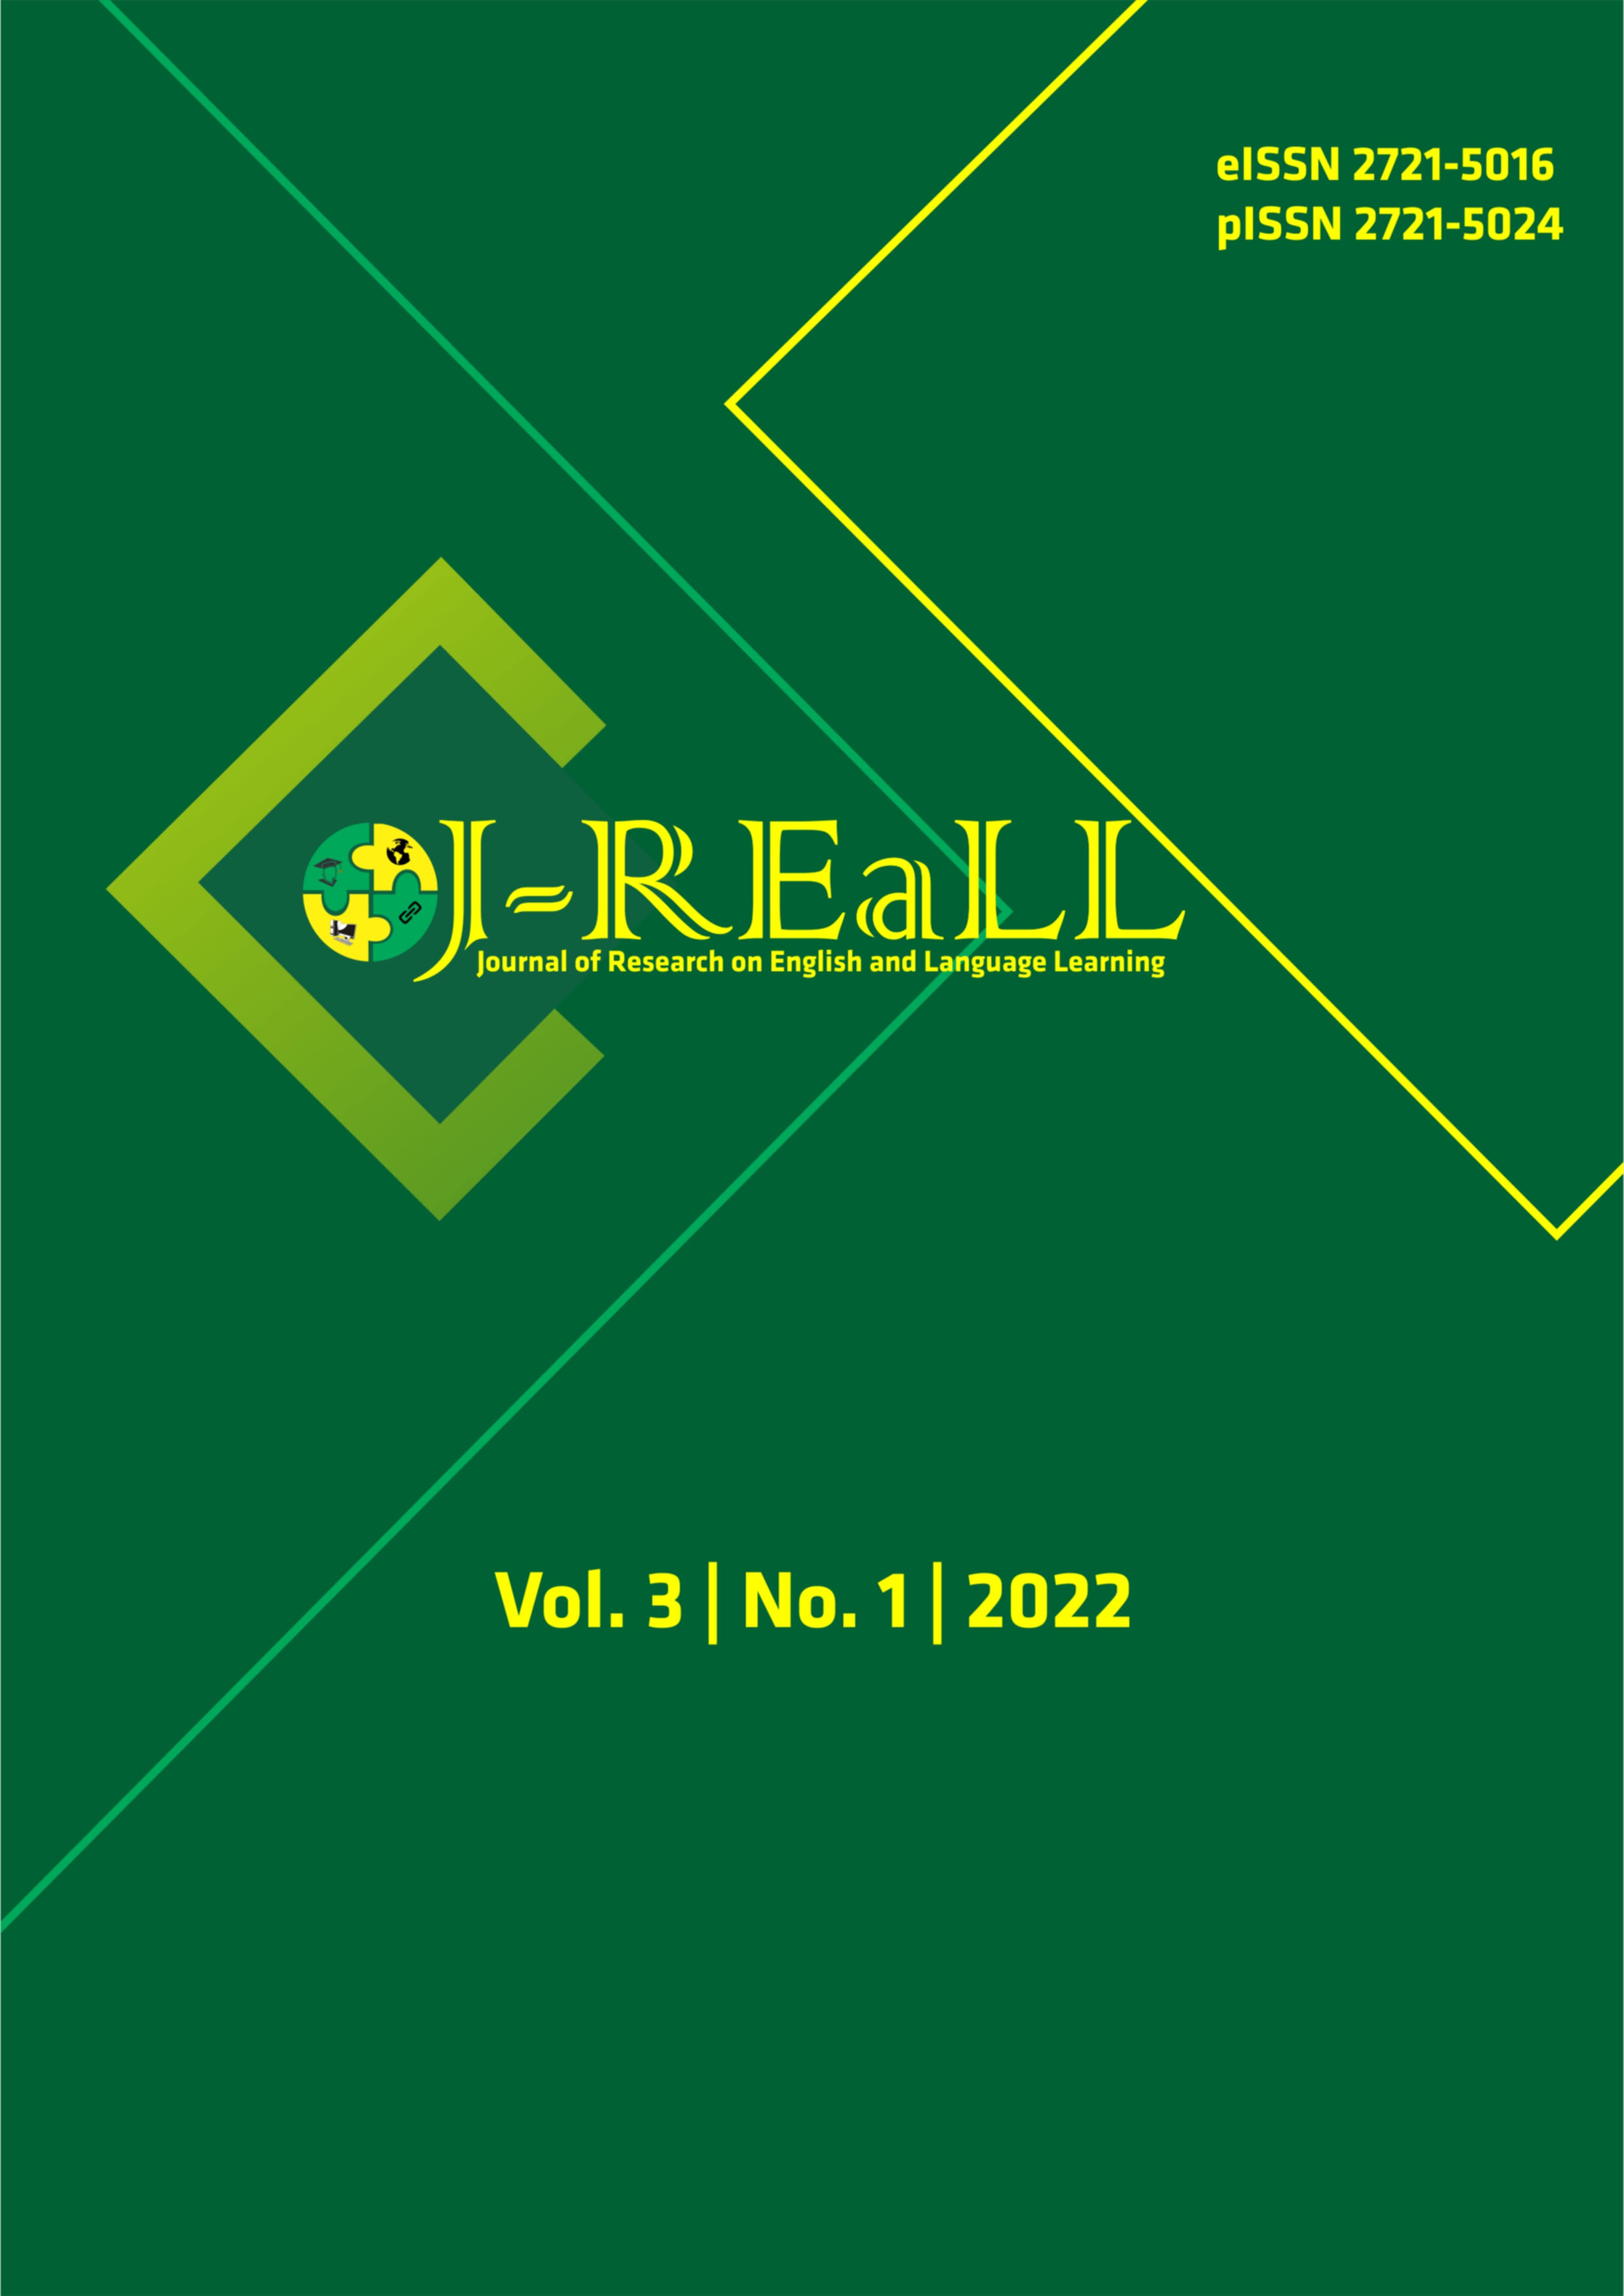 					View Vol. 3 No. 1 (2022): Journal of Research on English and Language Learning (J-REaLL)
				